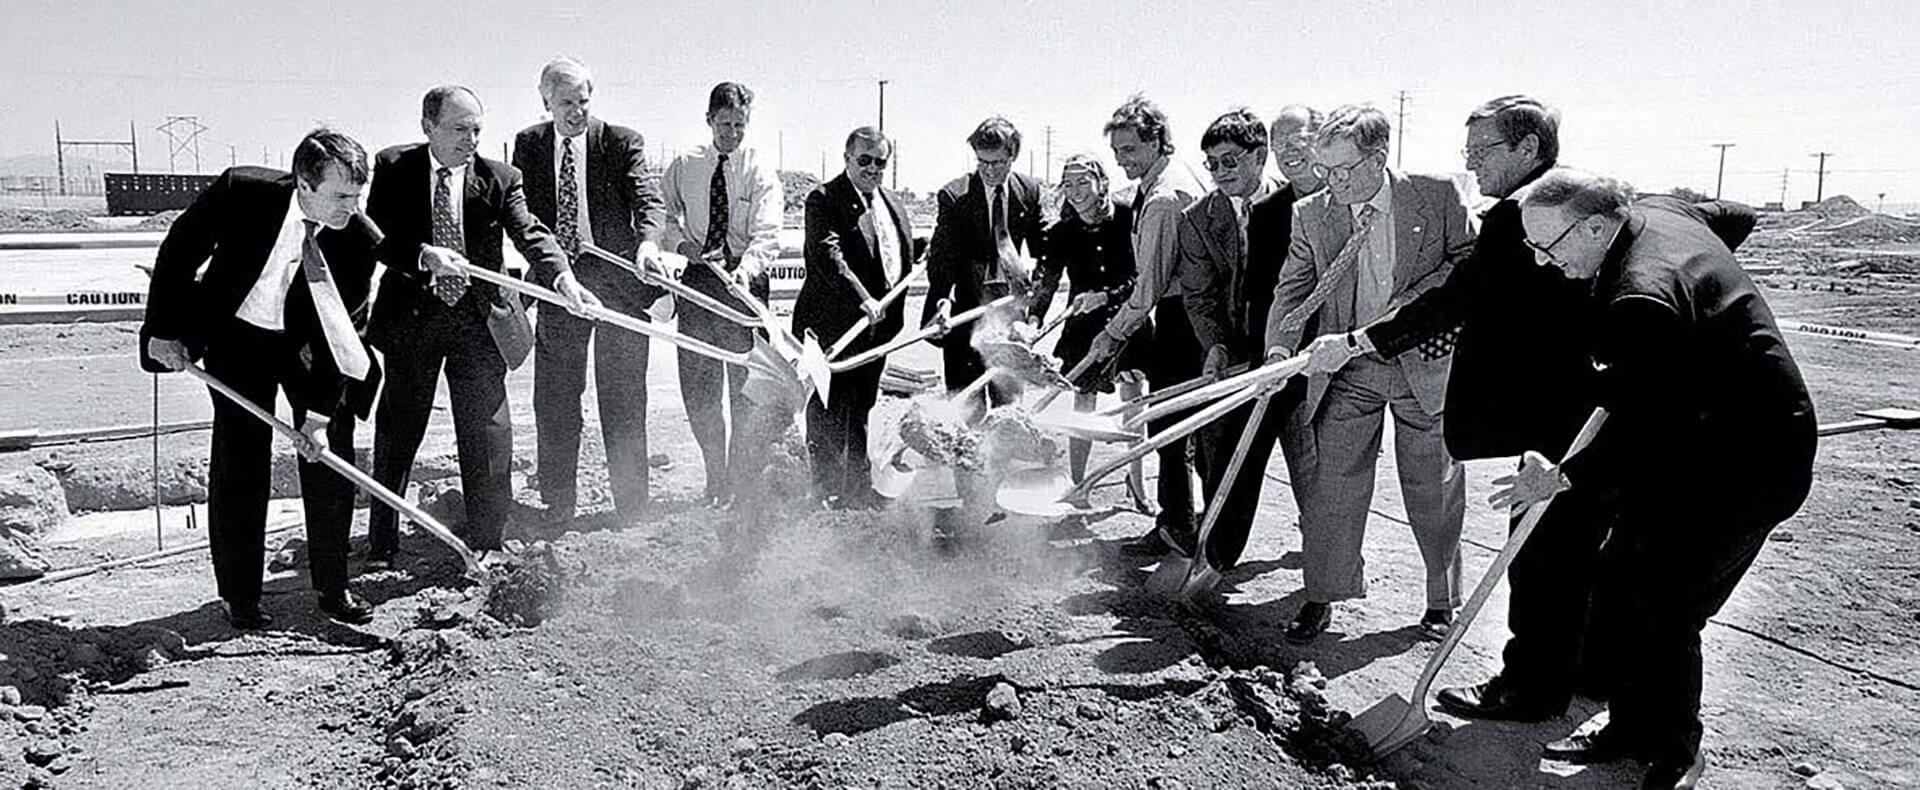 Twelve men and one woman in business clothes shovel dirt ceremonially at a groundbreaking event